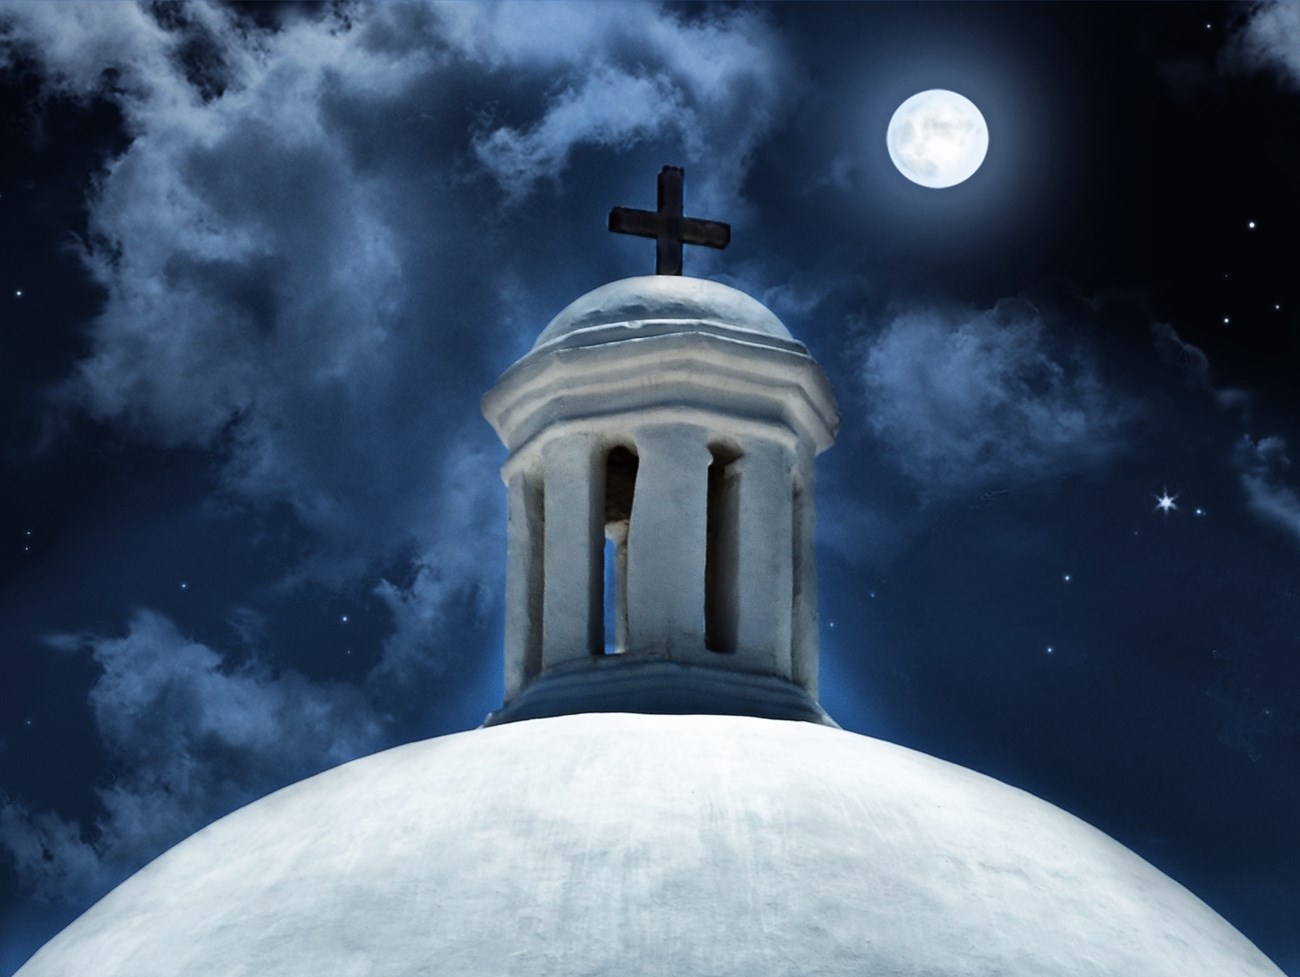 A white dome with cloudy night sky in the background.